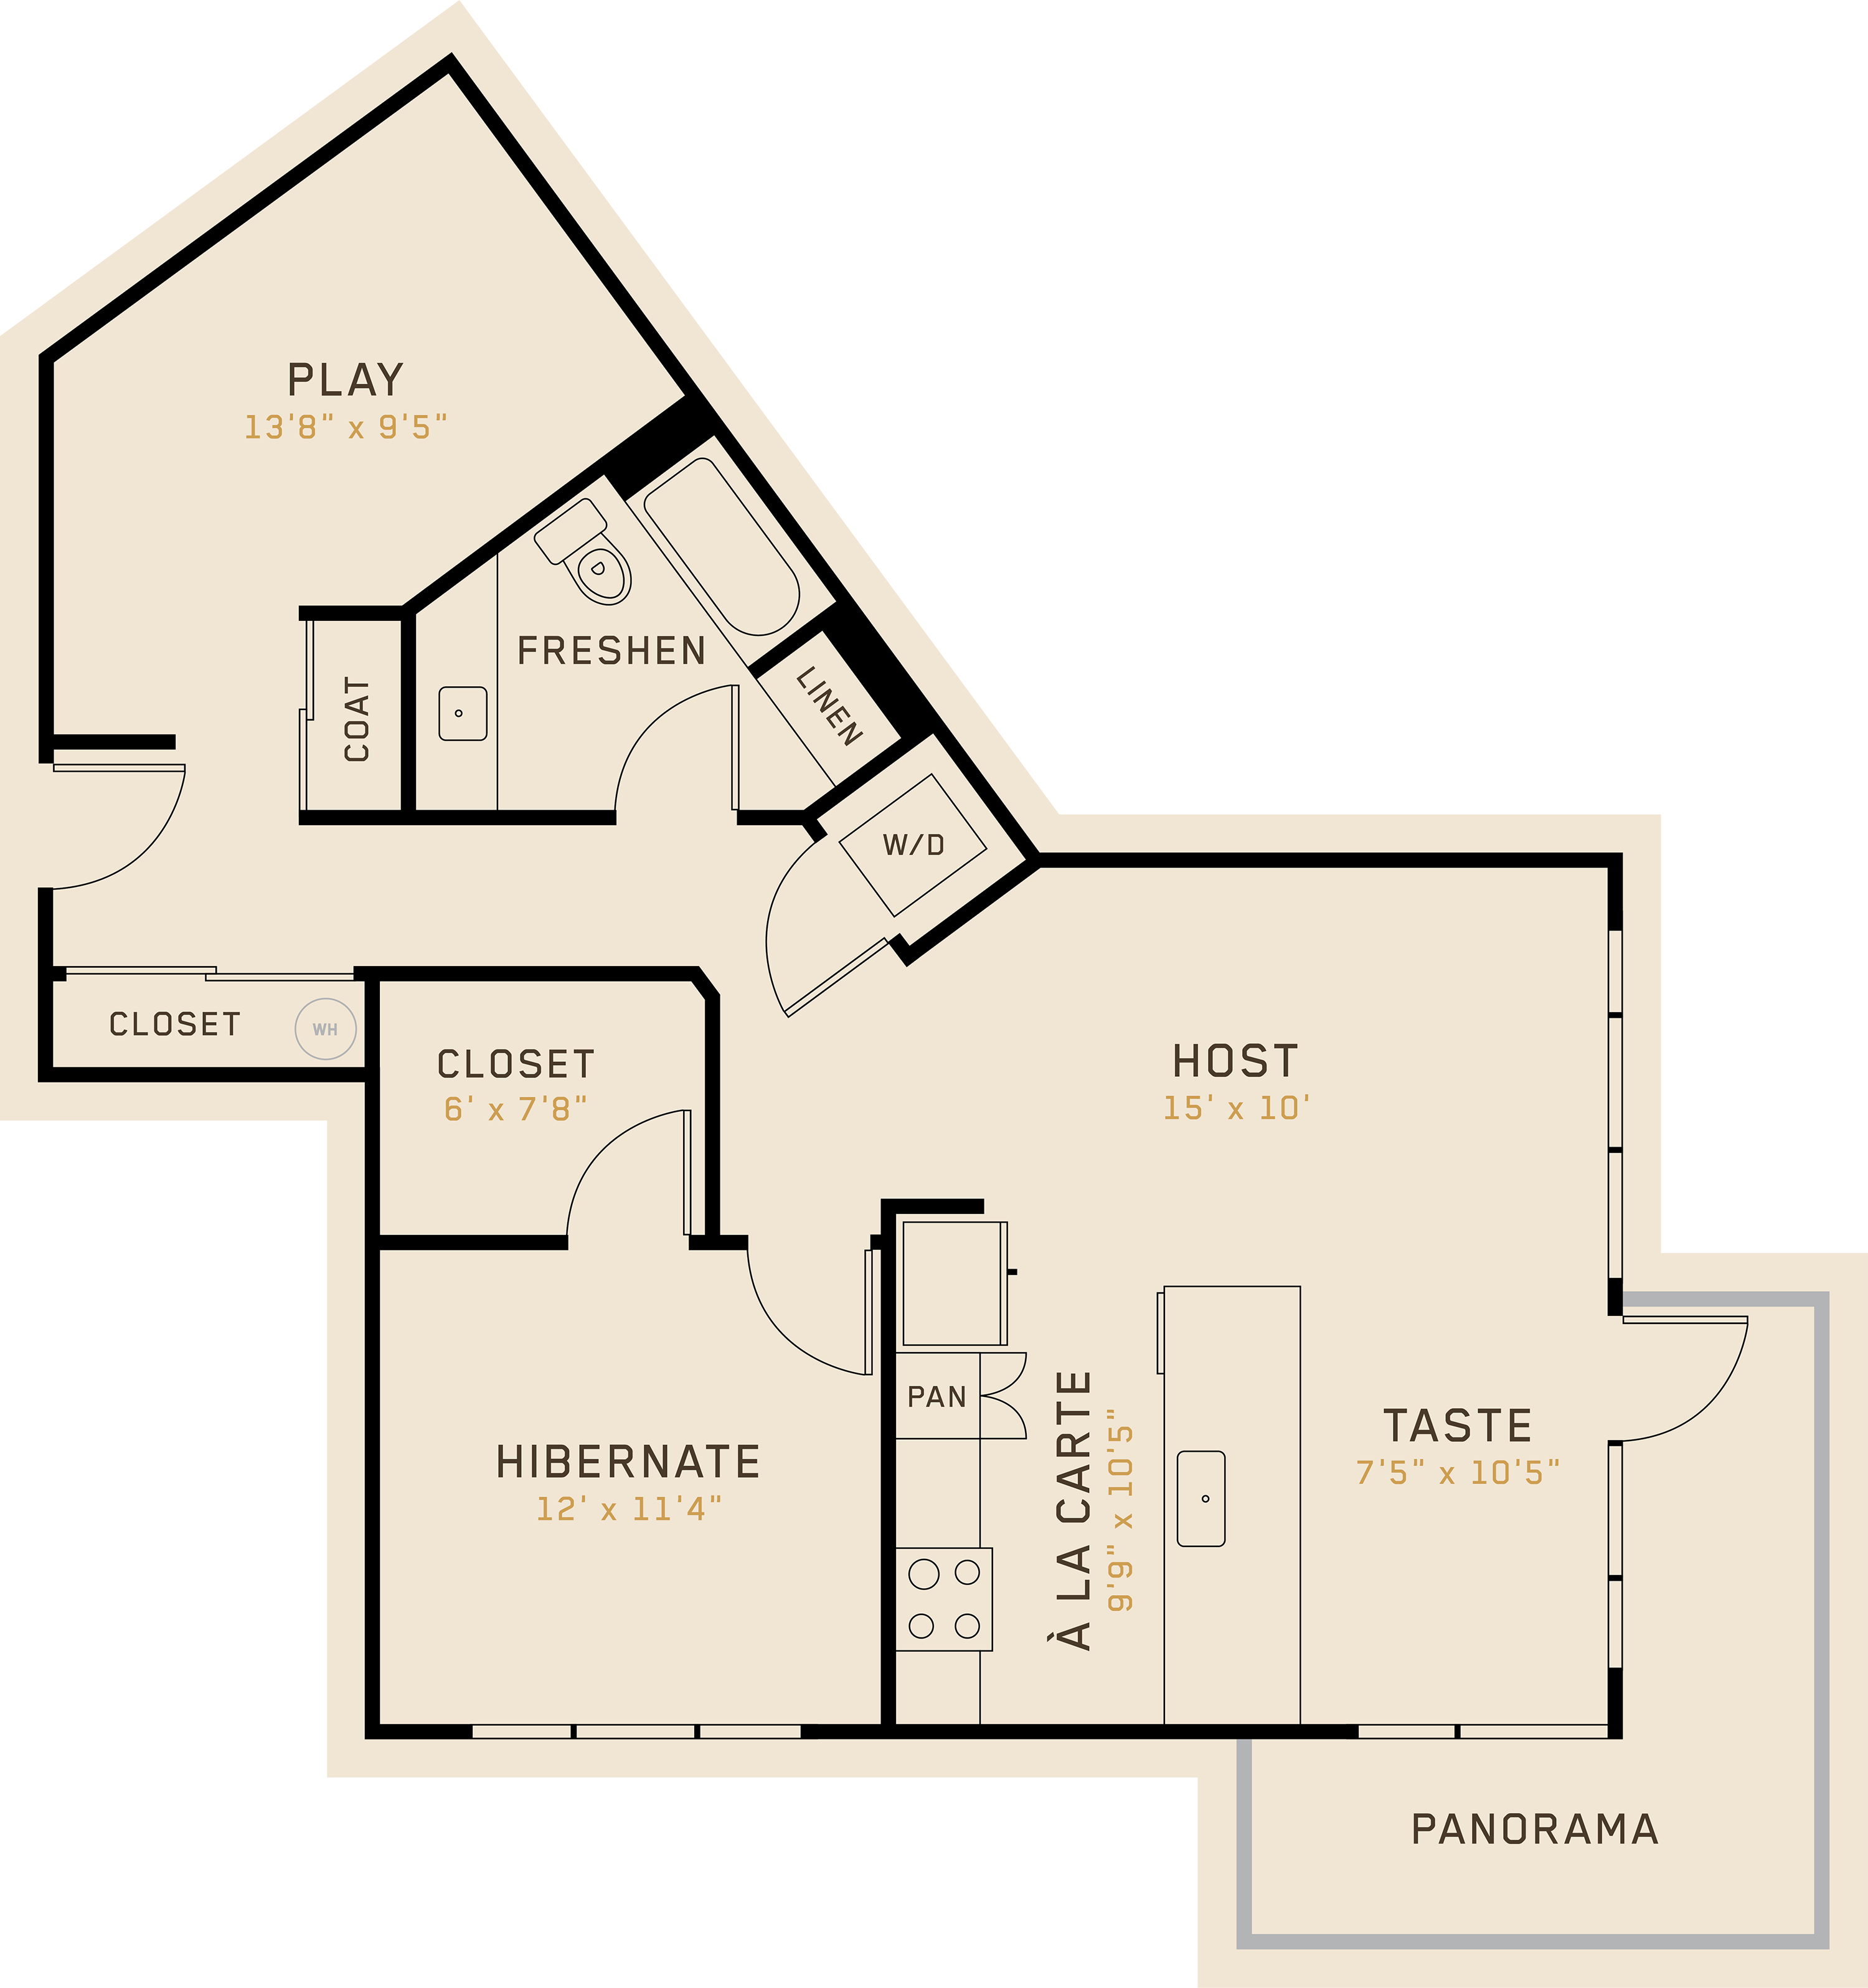 A1N floor plan featuring 1 bedroom, 1 bathroom, and is 974 square feet